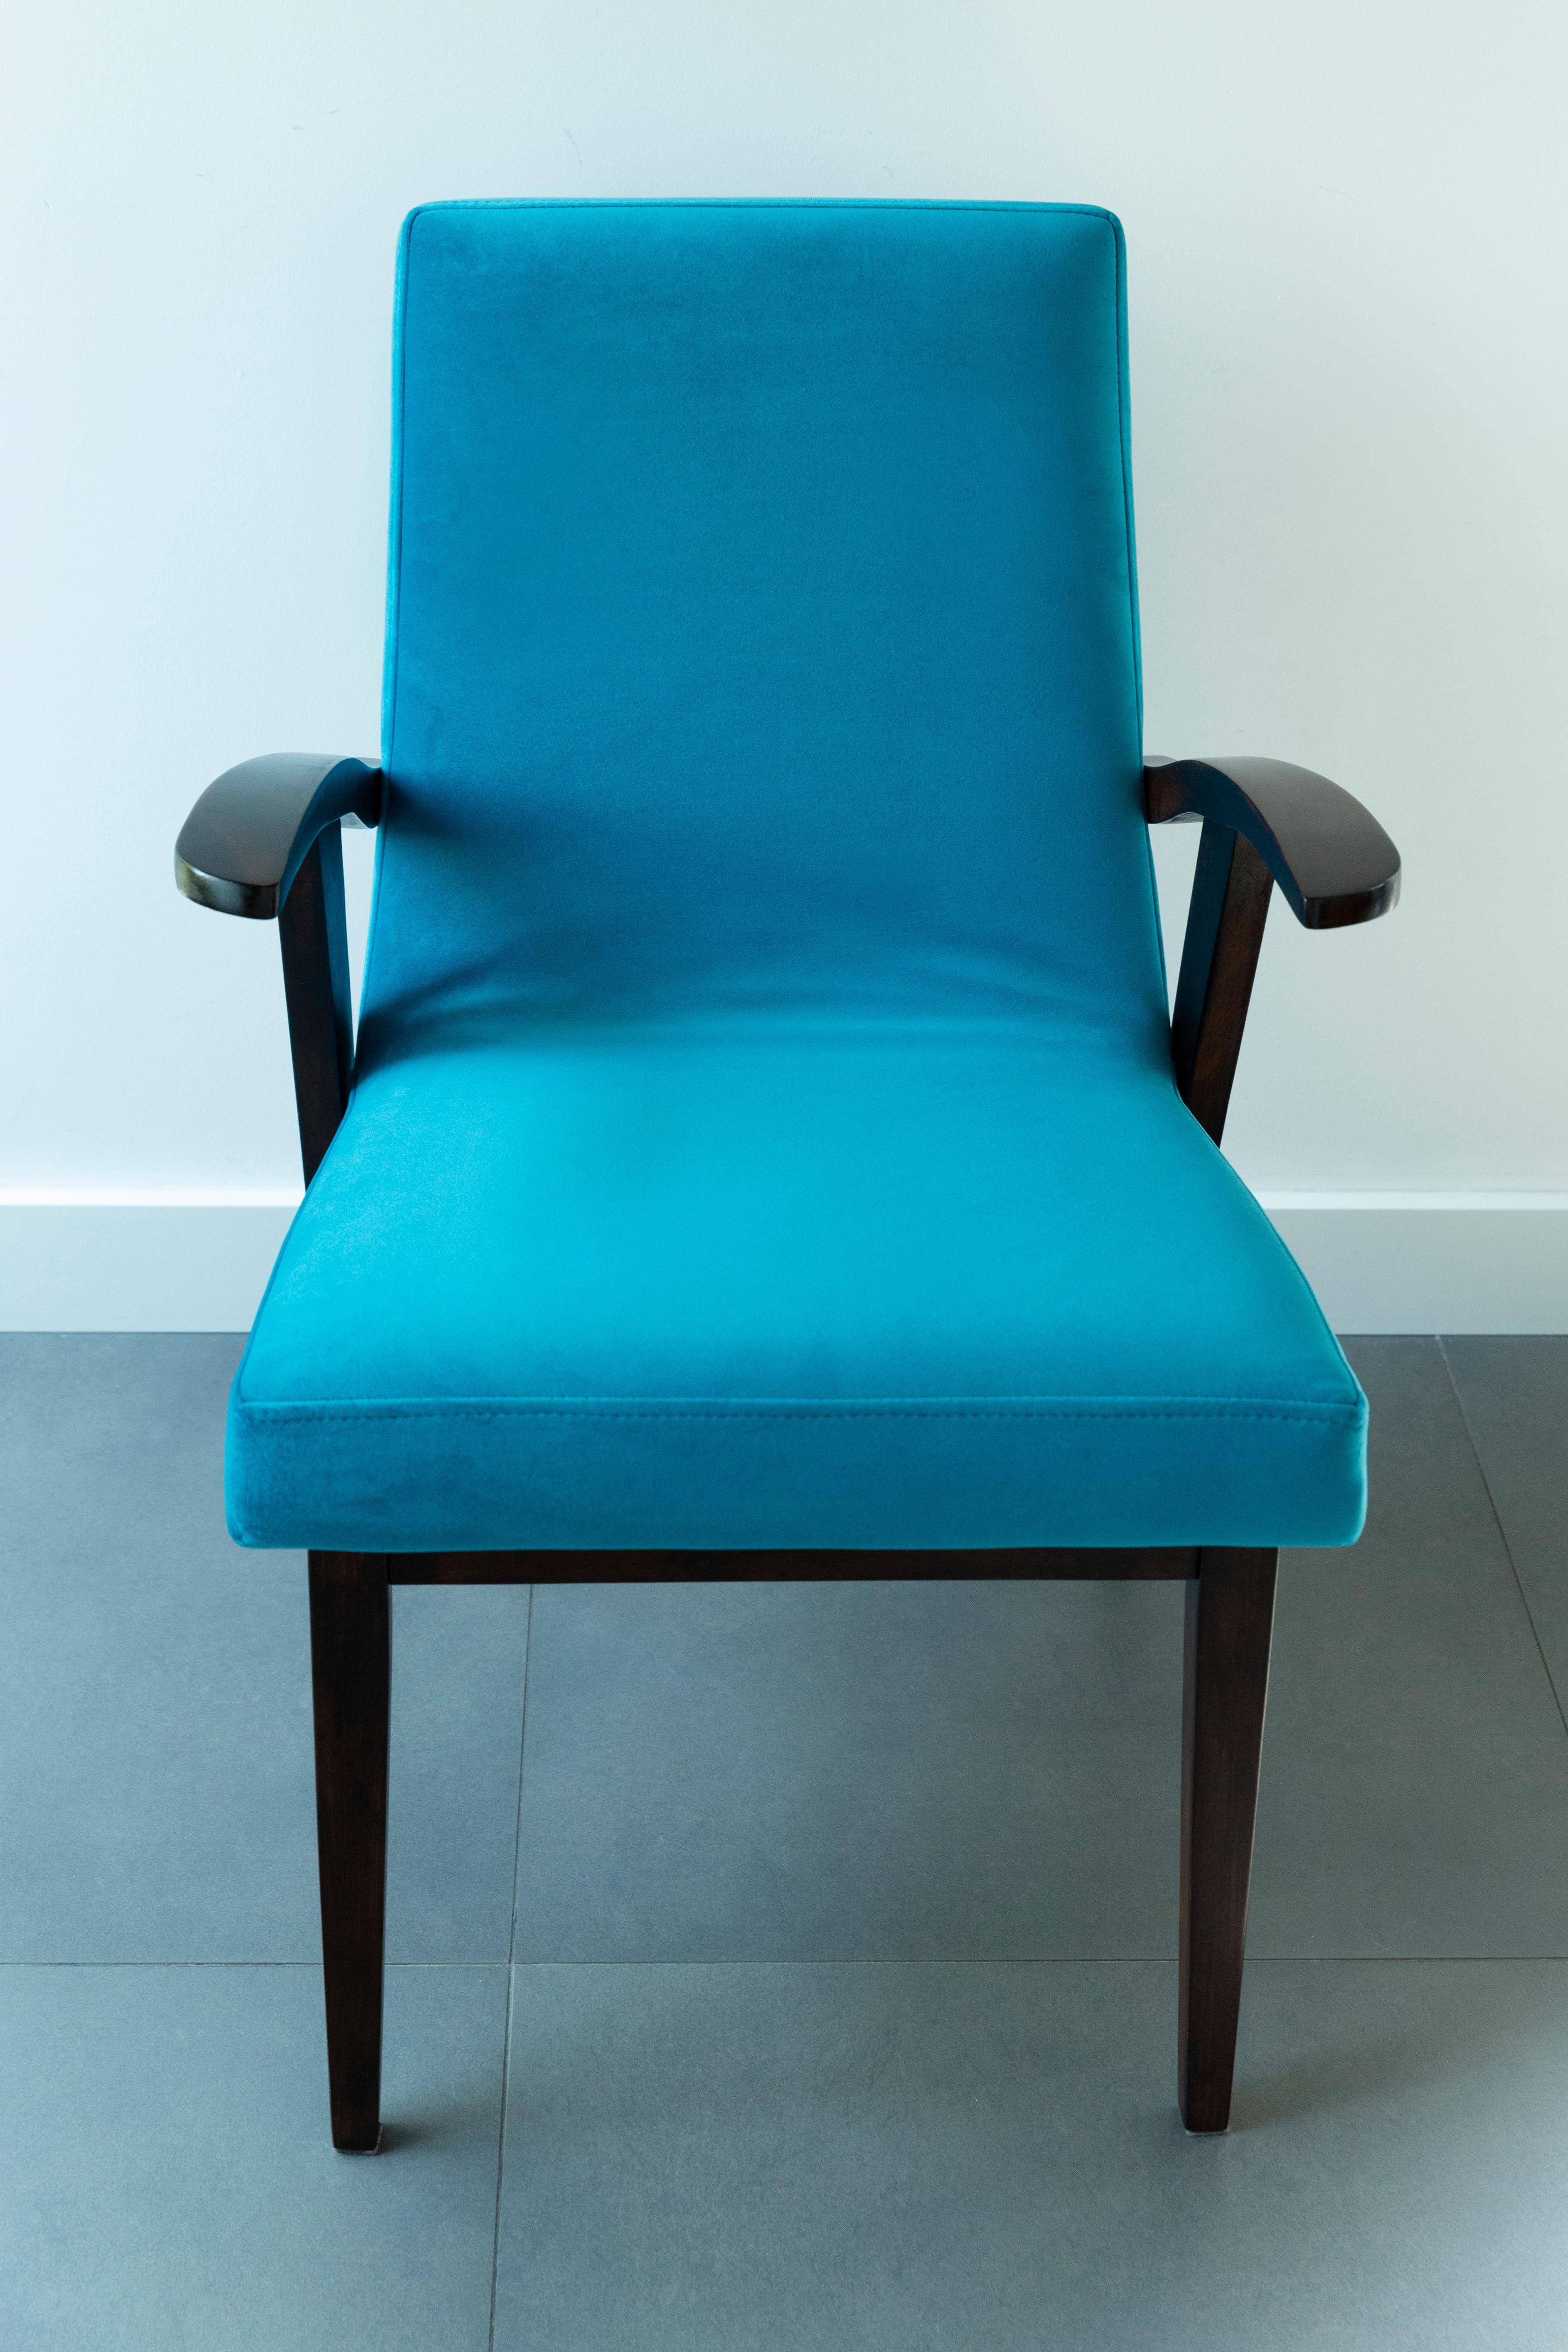 20th Century Vintage Turquoise Blue Armchair by Mieczyslaw Puchala, 1960s For Sale 5